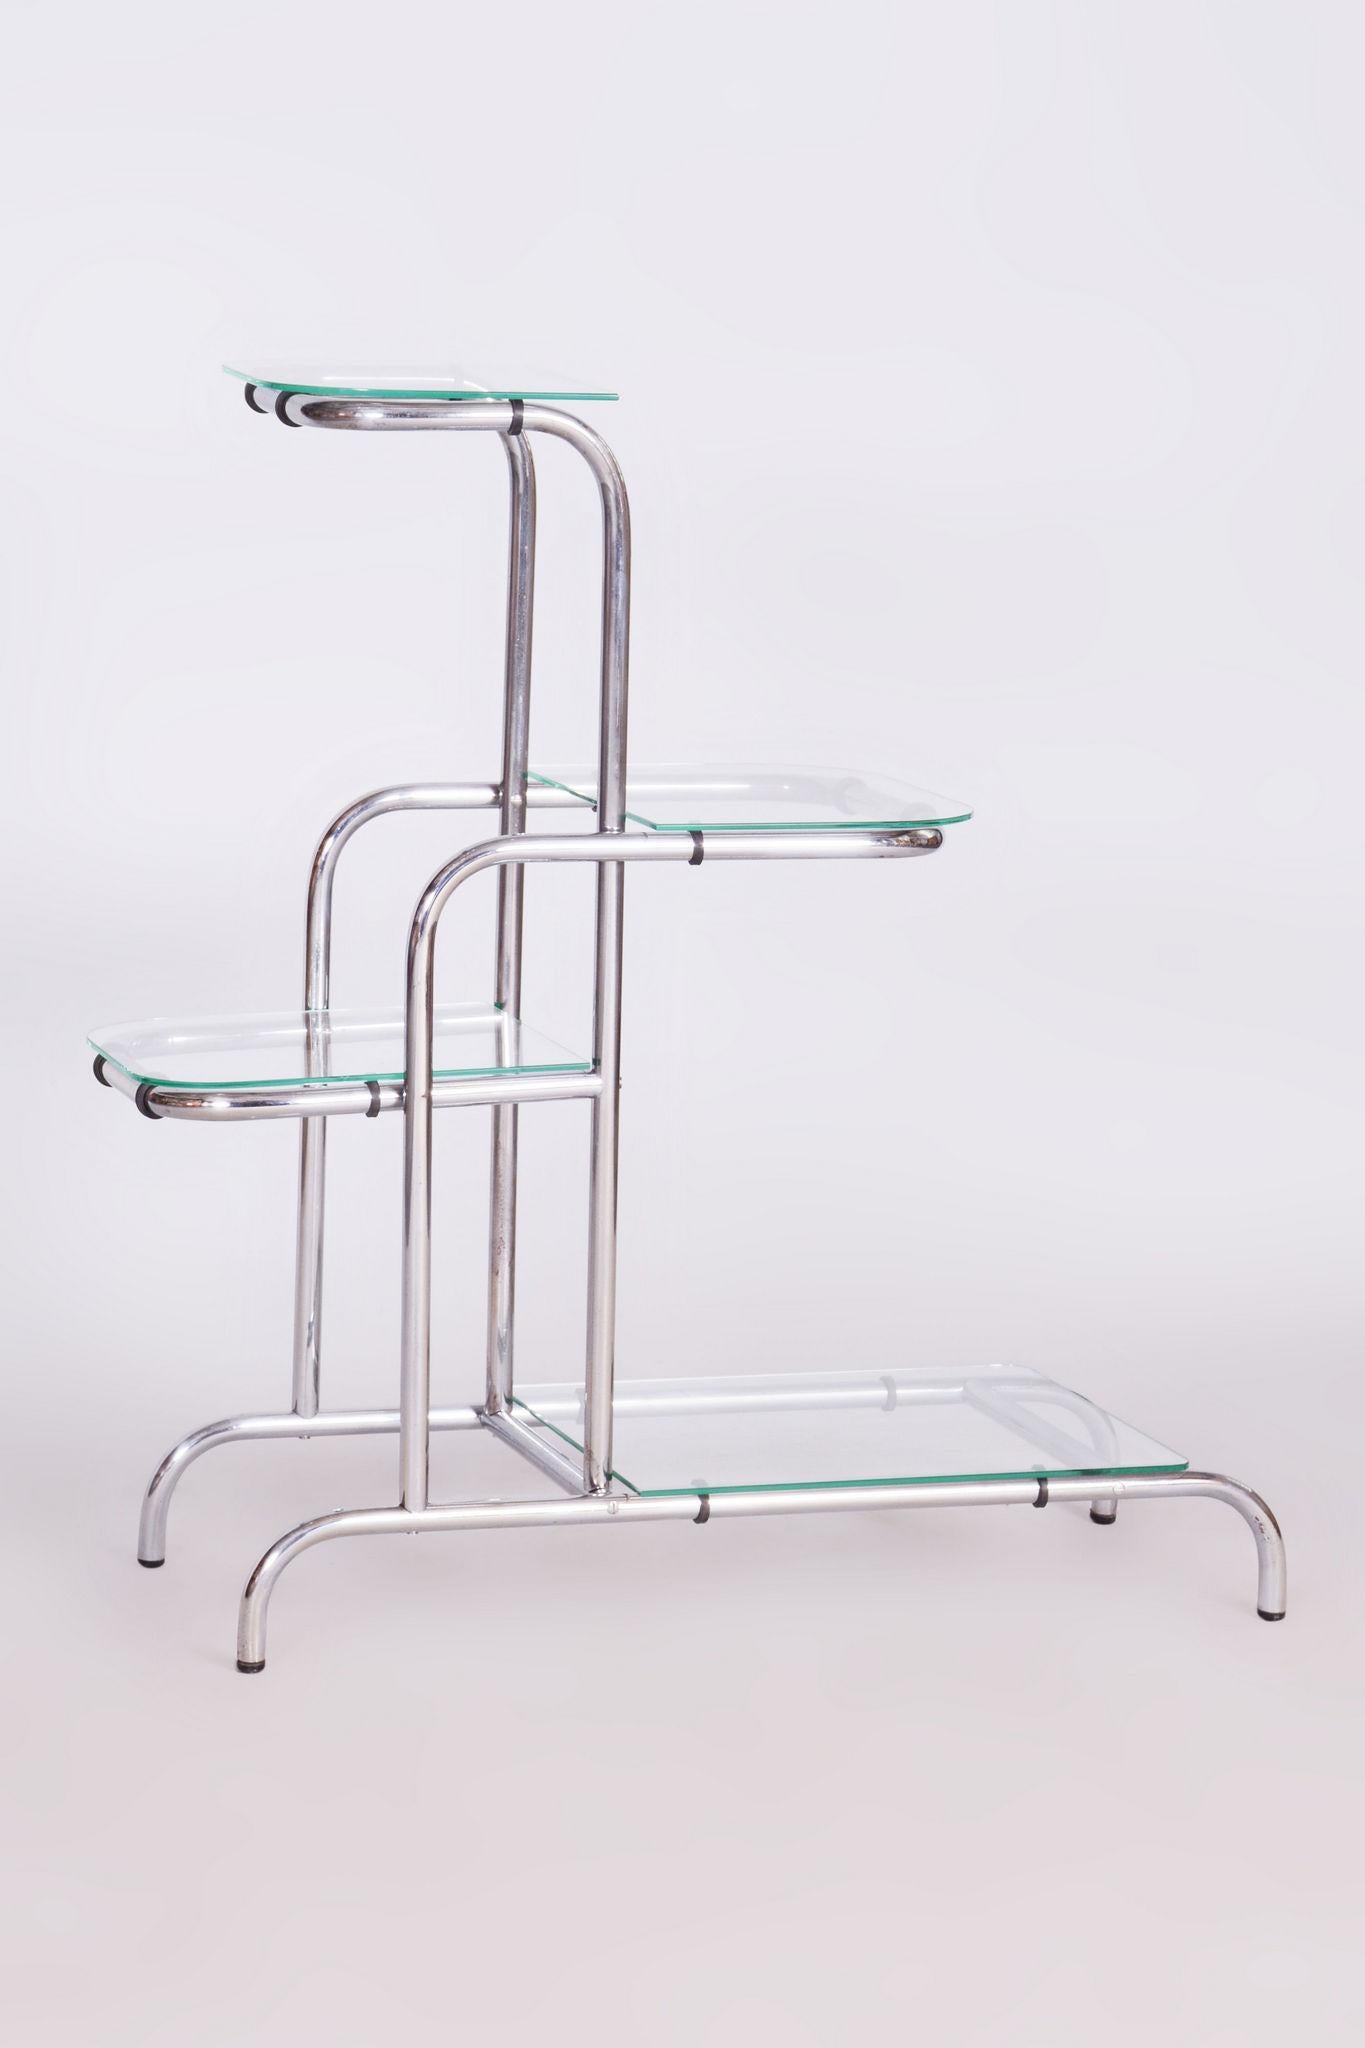 Metal Restored Bauhaus Etagere, Chrome-Plated Steel, Czechia, 1930s For Sale